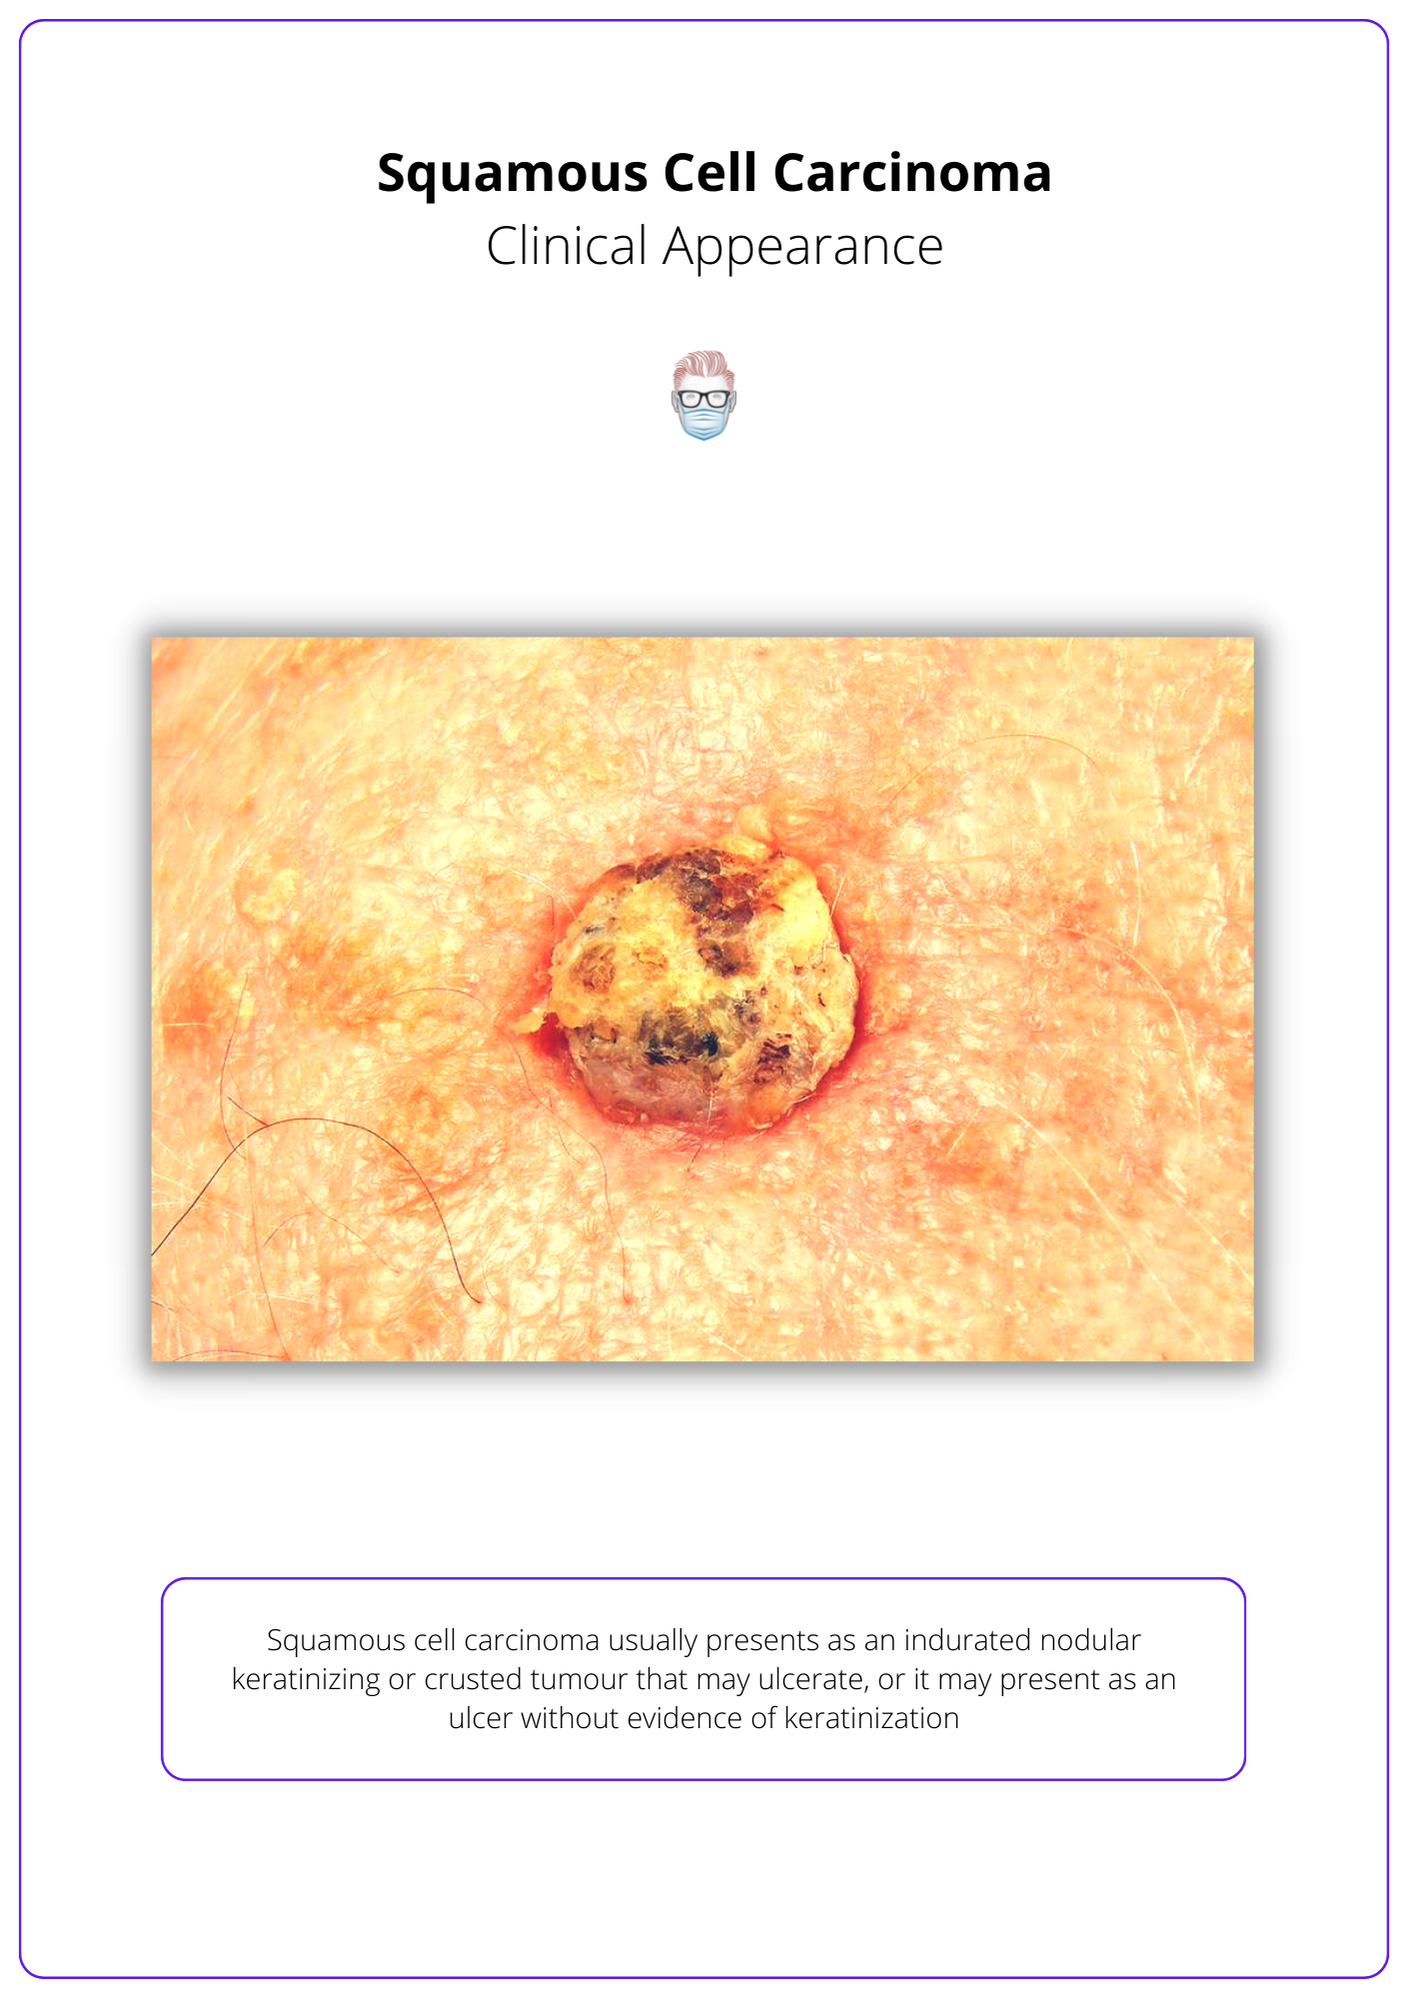 Squamous cell carcinoma usually presents as an indurated nodular keratinizing or crusted tumour that may ulcerate, or it may present as an ulcer without evidence of keratinization